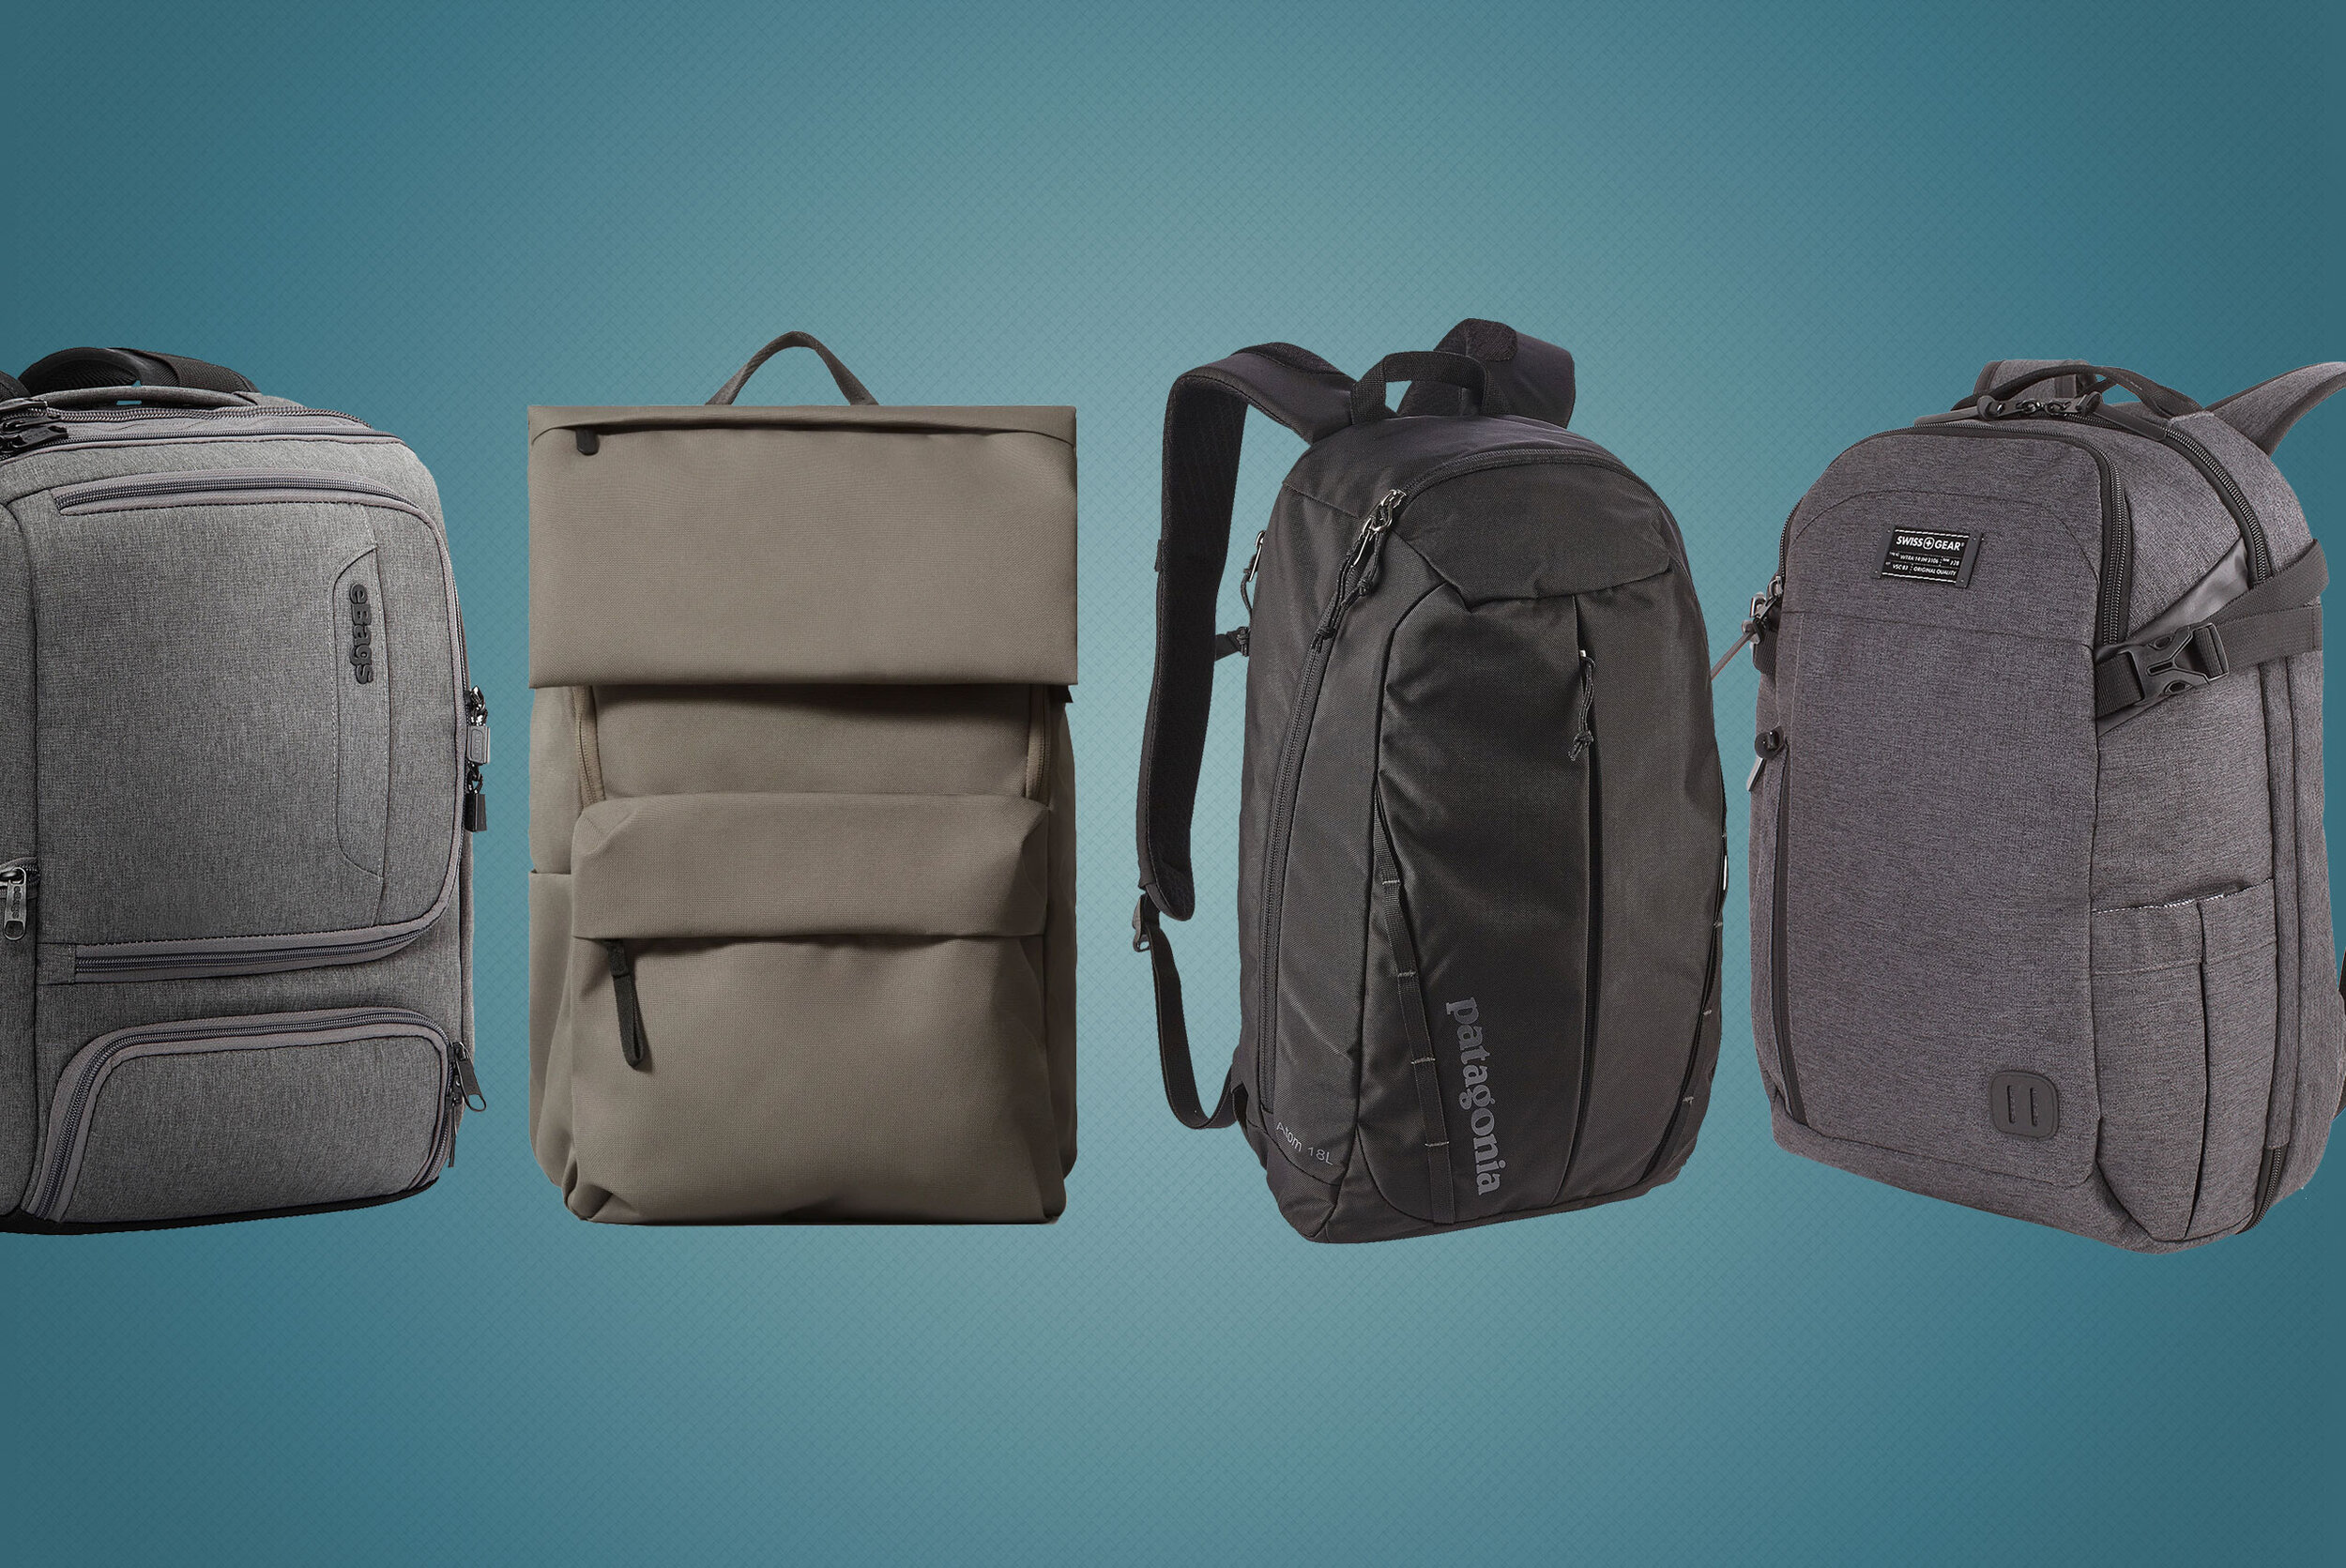 Ebags for the perfect backpack or bag